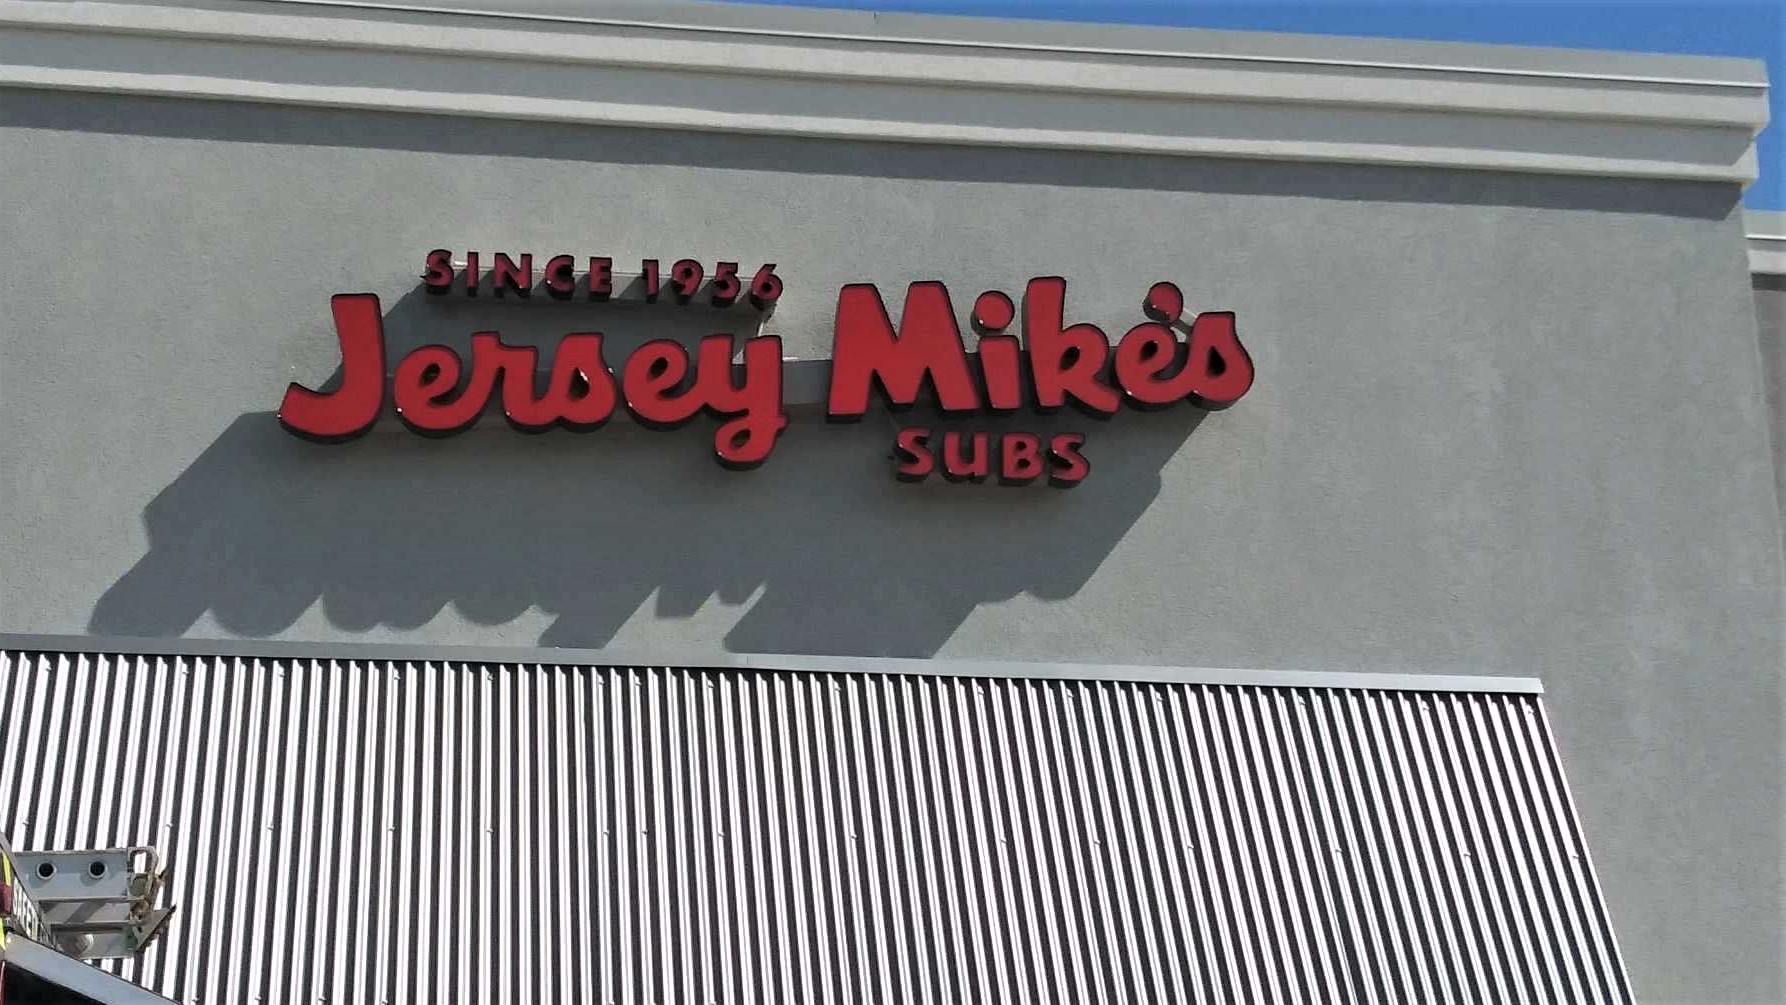 jersey mike's new port richey